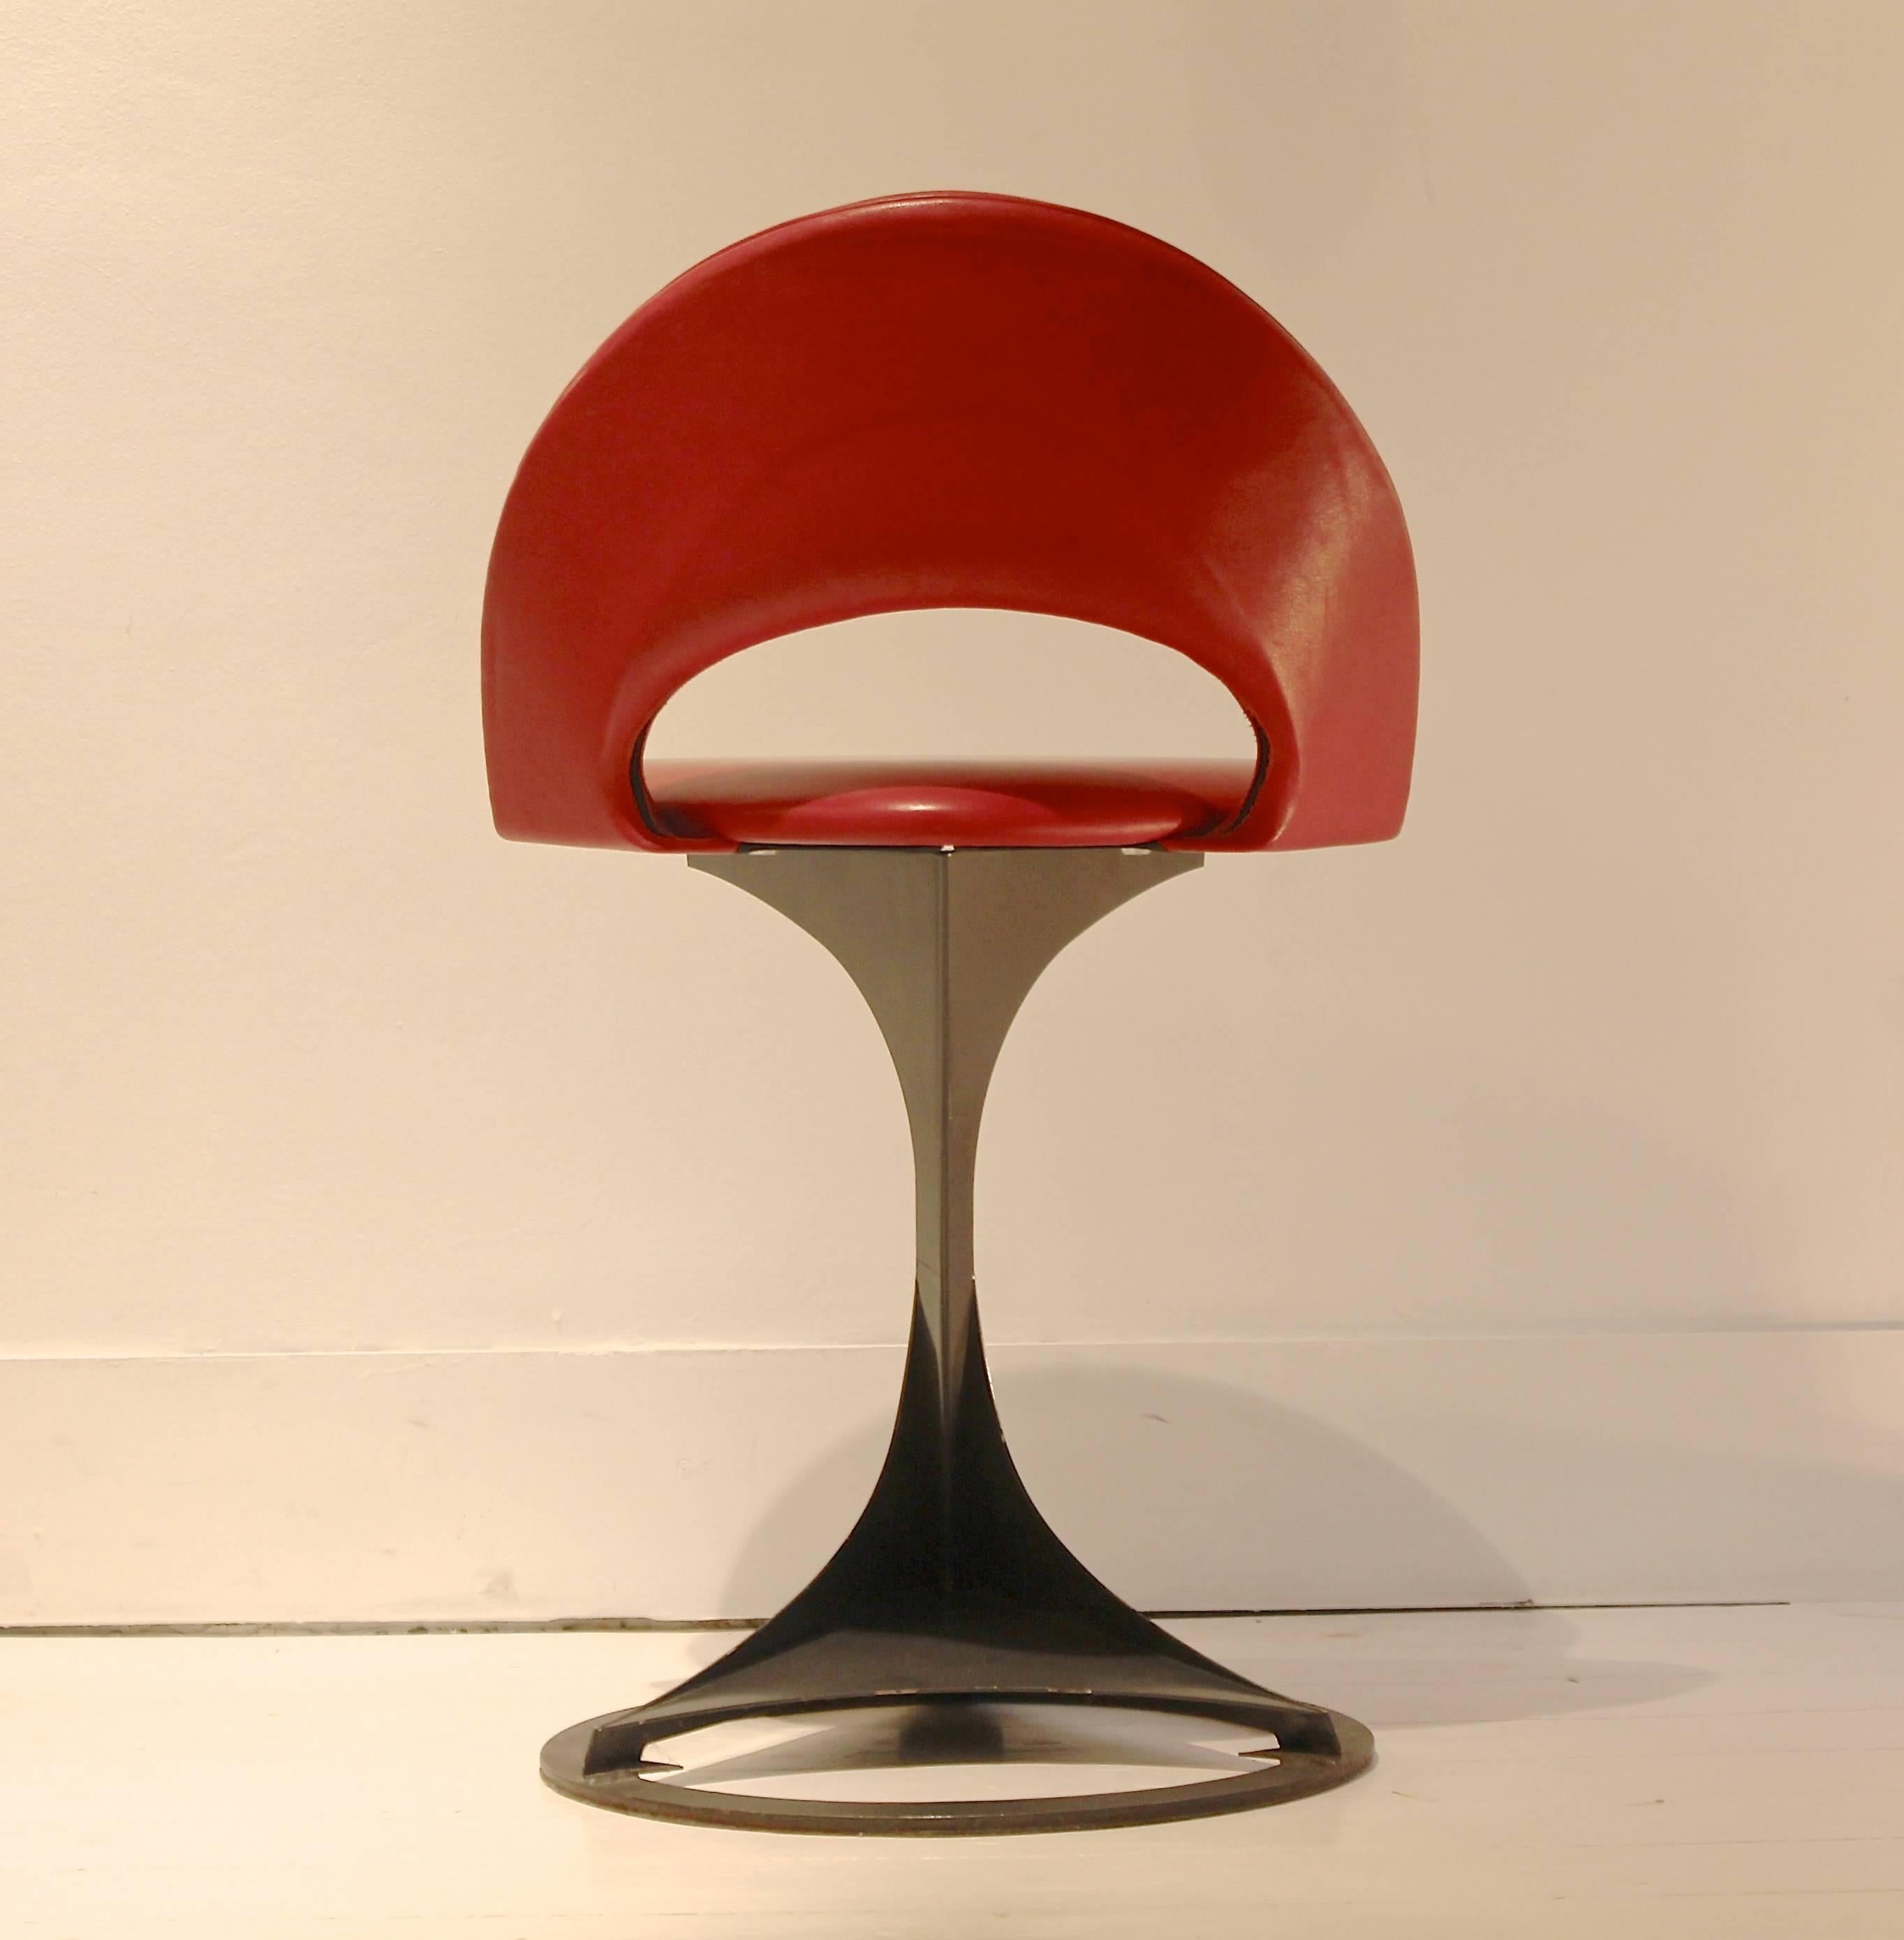 Enameled Set of Six Red Leather Chairs by Santiago Calatrava for Desede Switzerland, 1986